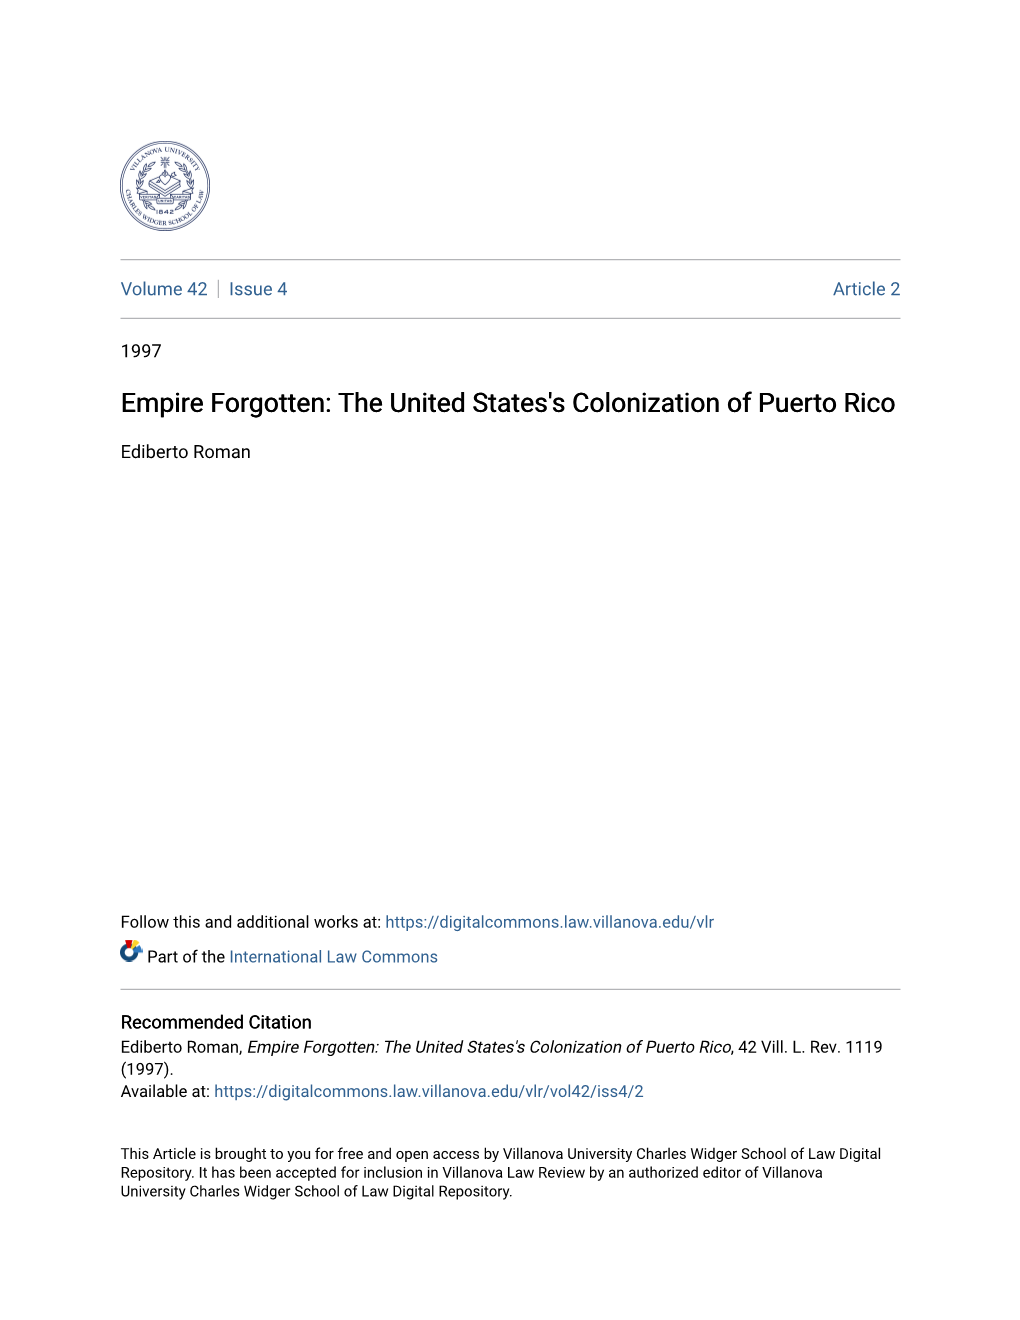 The United States's Colonization of Puerto Rico